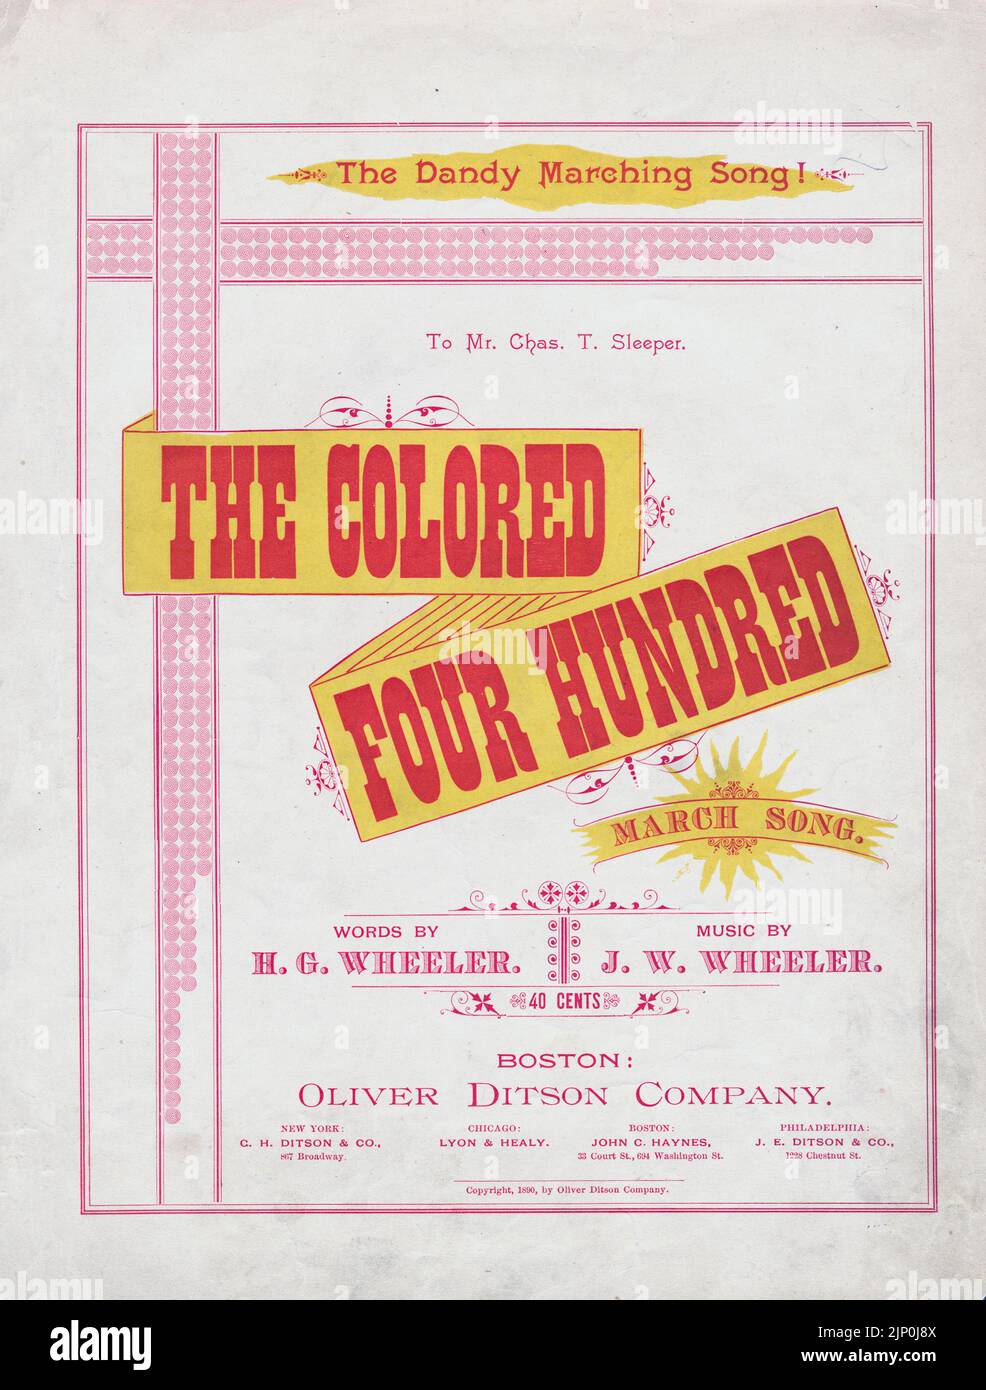 The Colored Four Hundred, March Song, Words by H. G. Wheeler, Music by J. W. Wheeler, Published by Oliver Ditson Company (1890) Sheet music cover Stock Photo